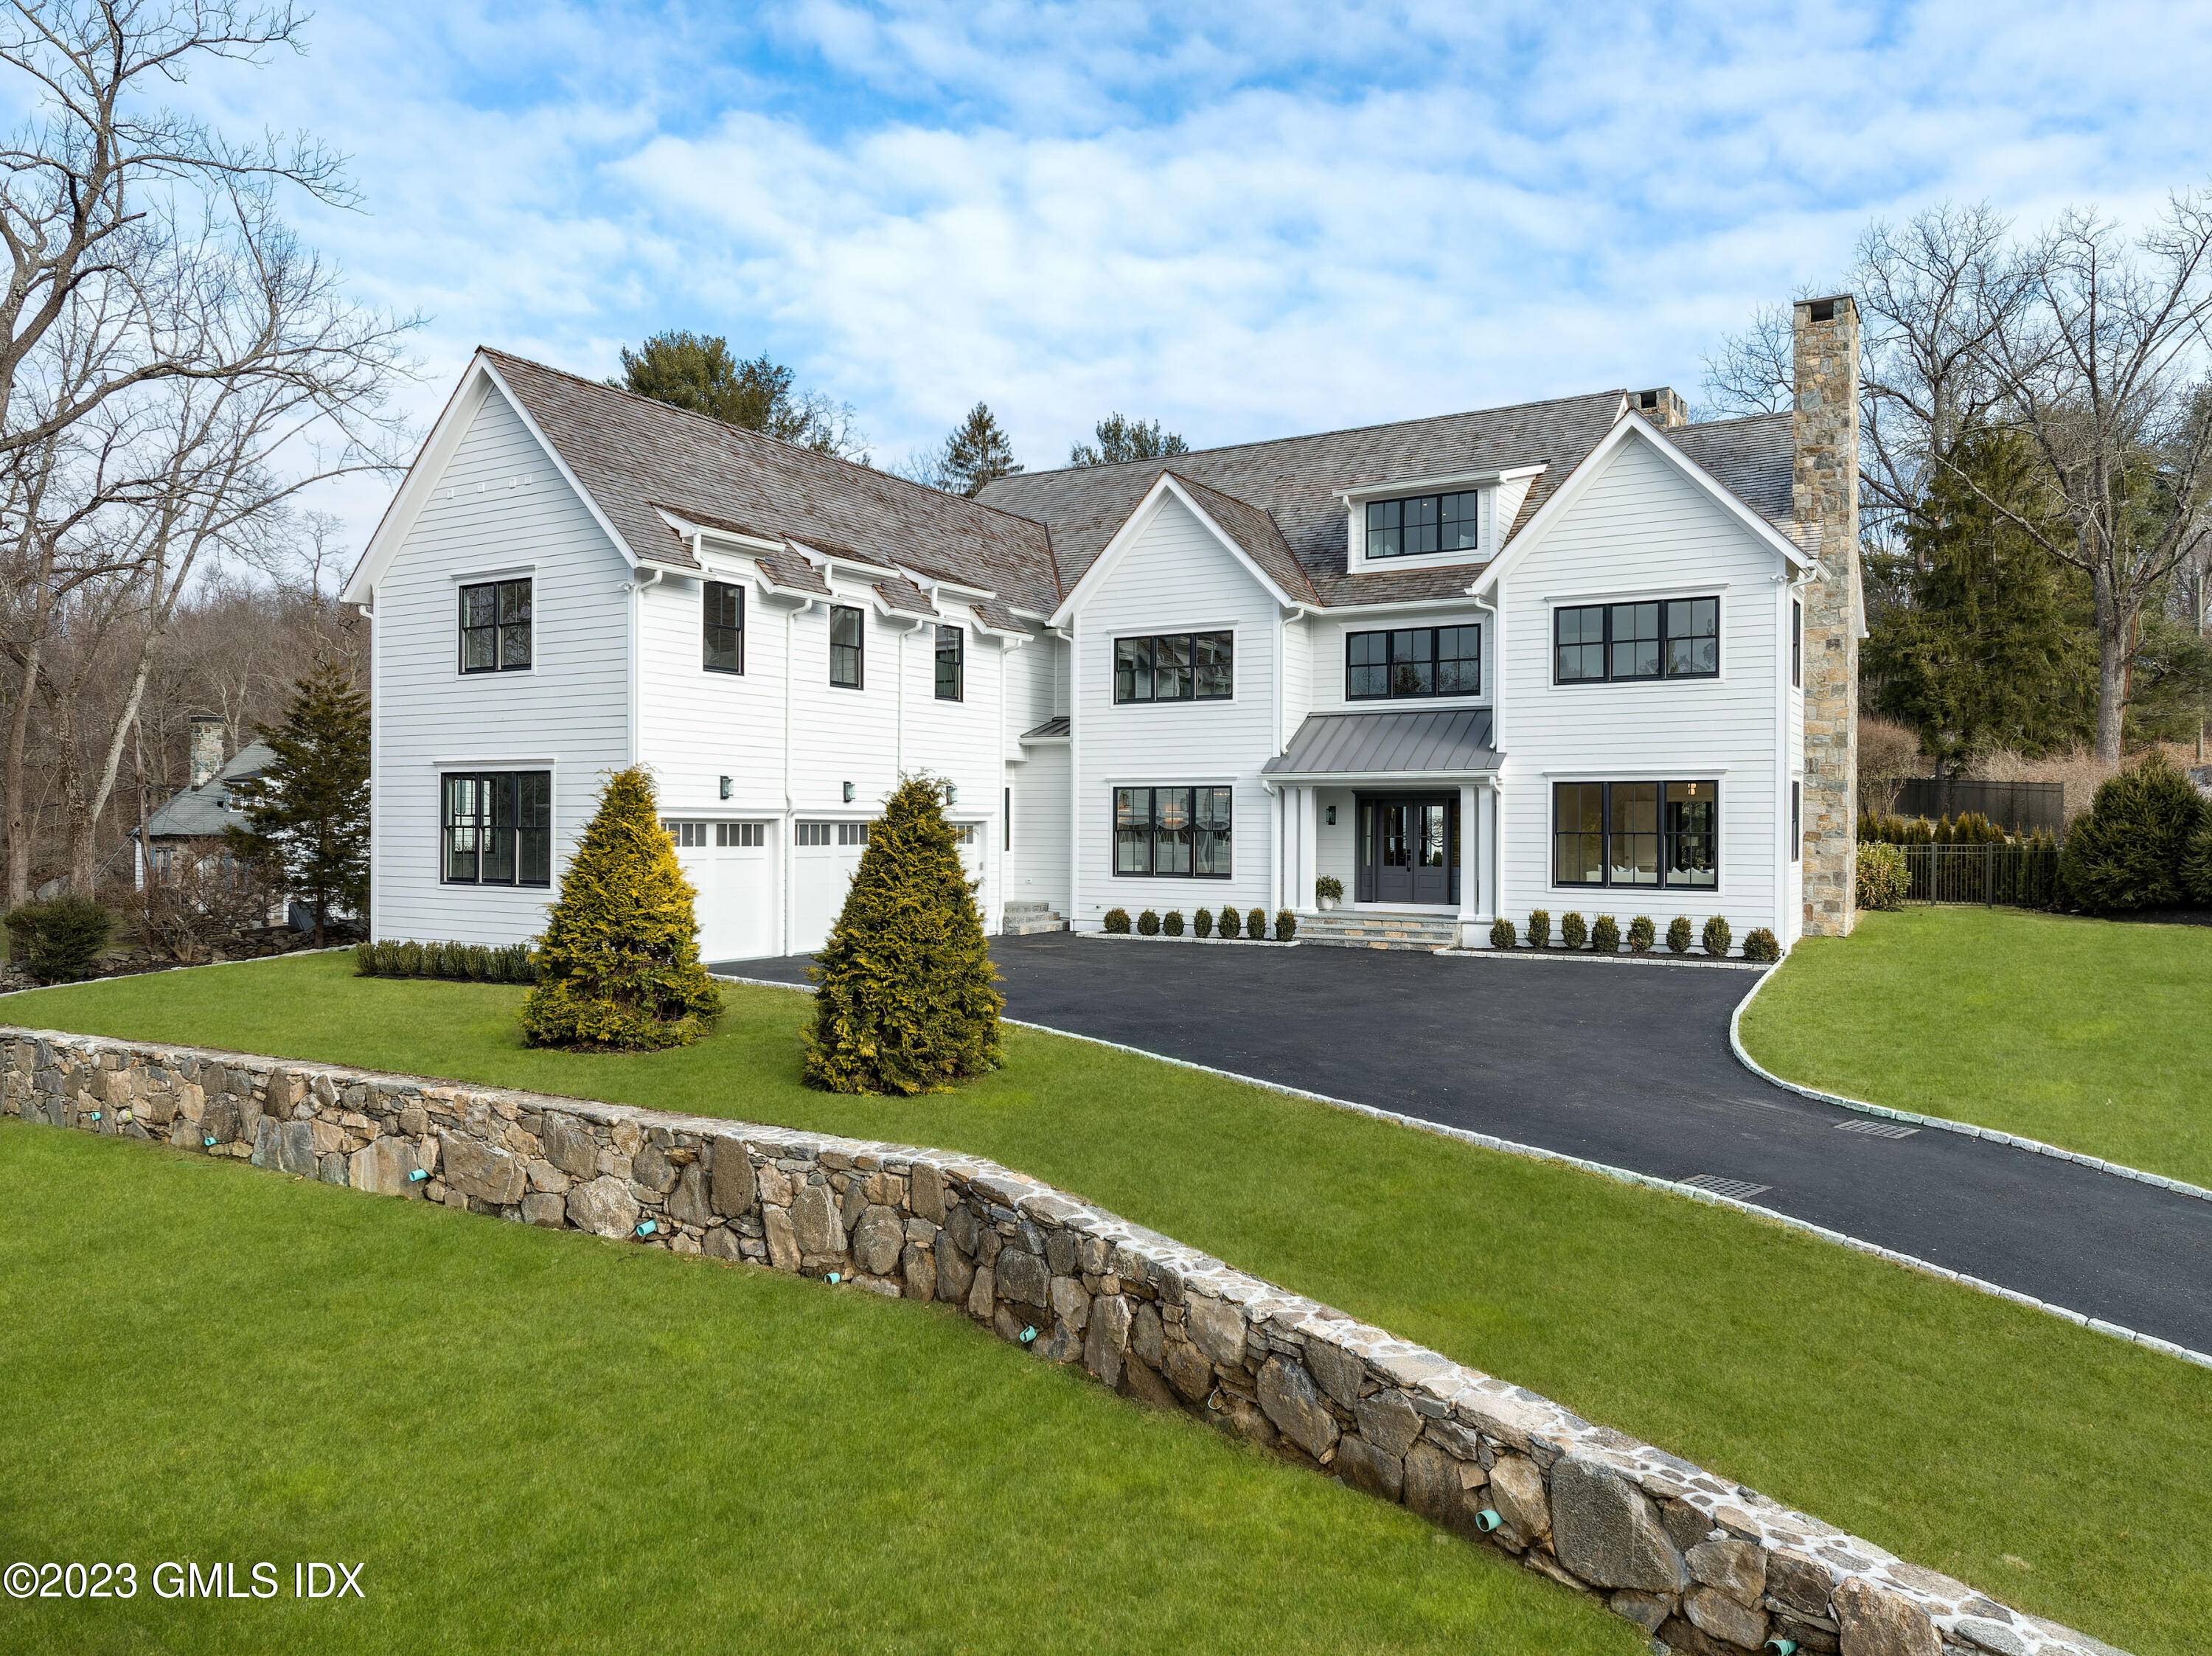 Exciting new 2023 construction on quiet lane set high on 2 acres off Riversville w 10' ceilings, spectacular natural light and 4 levels of living.